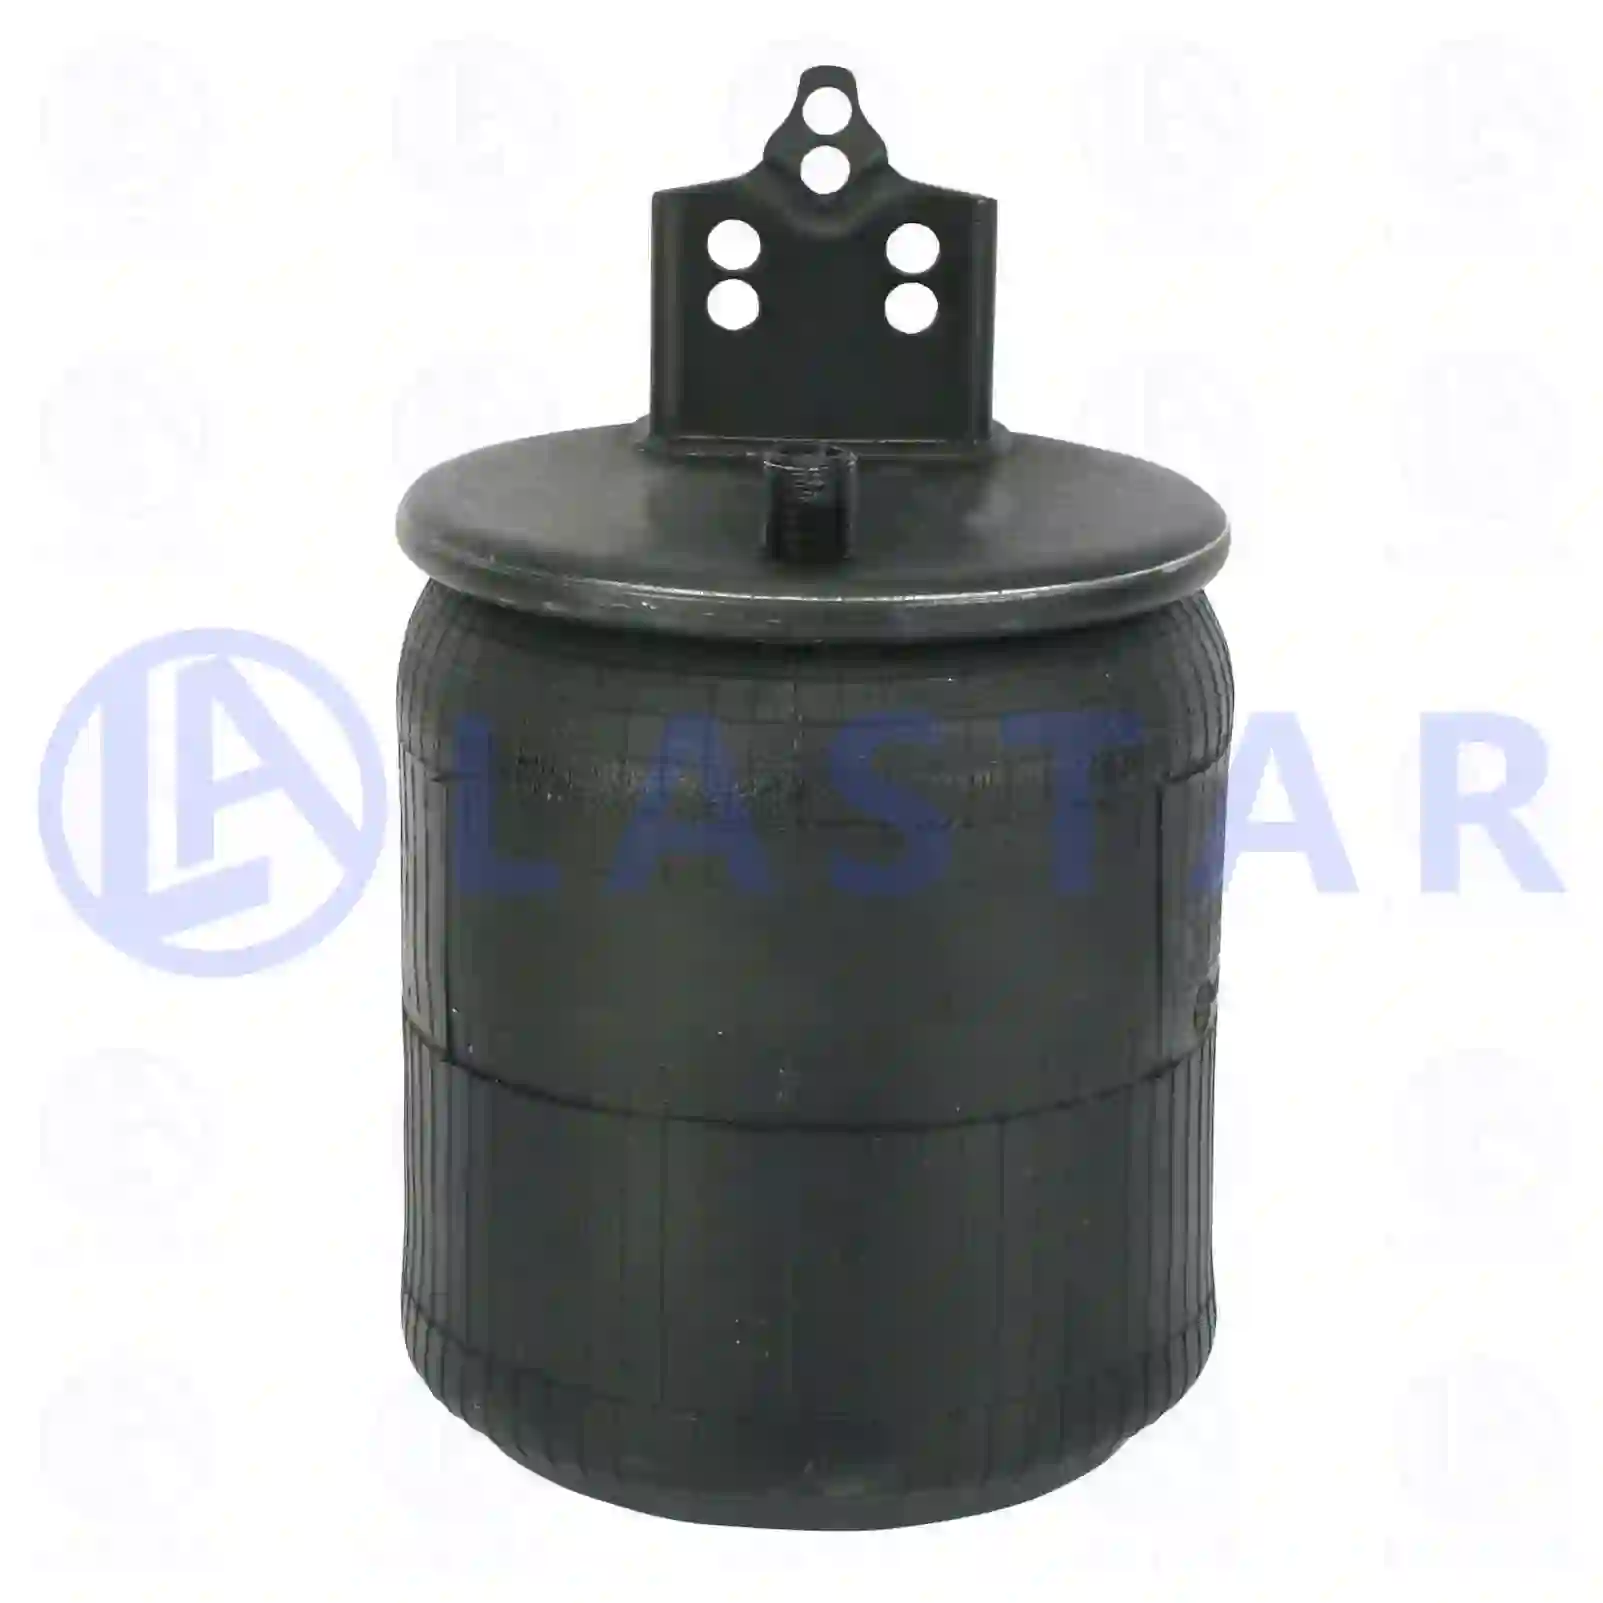 Air spring, with steel piston, 77728701, 7421321521, 20541518, 20843252, 20909150, 21321521, 21977973, ZG40751-0008 ||  77728701 Lastar Spare Part | Truck Spare Parts, Auotomotive Spare Parts Air spring, with steel piston, 77728701, 7421321521, 20541518, 20843252, 20909150, 21321521, 21977973, ZG40751-0008 ||  77728701 Lastar Spare Part | Truck Spare Parts, Auotomotive Spare Parts